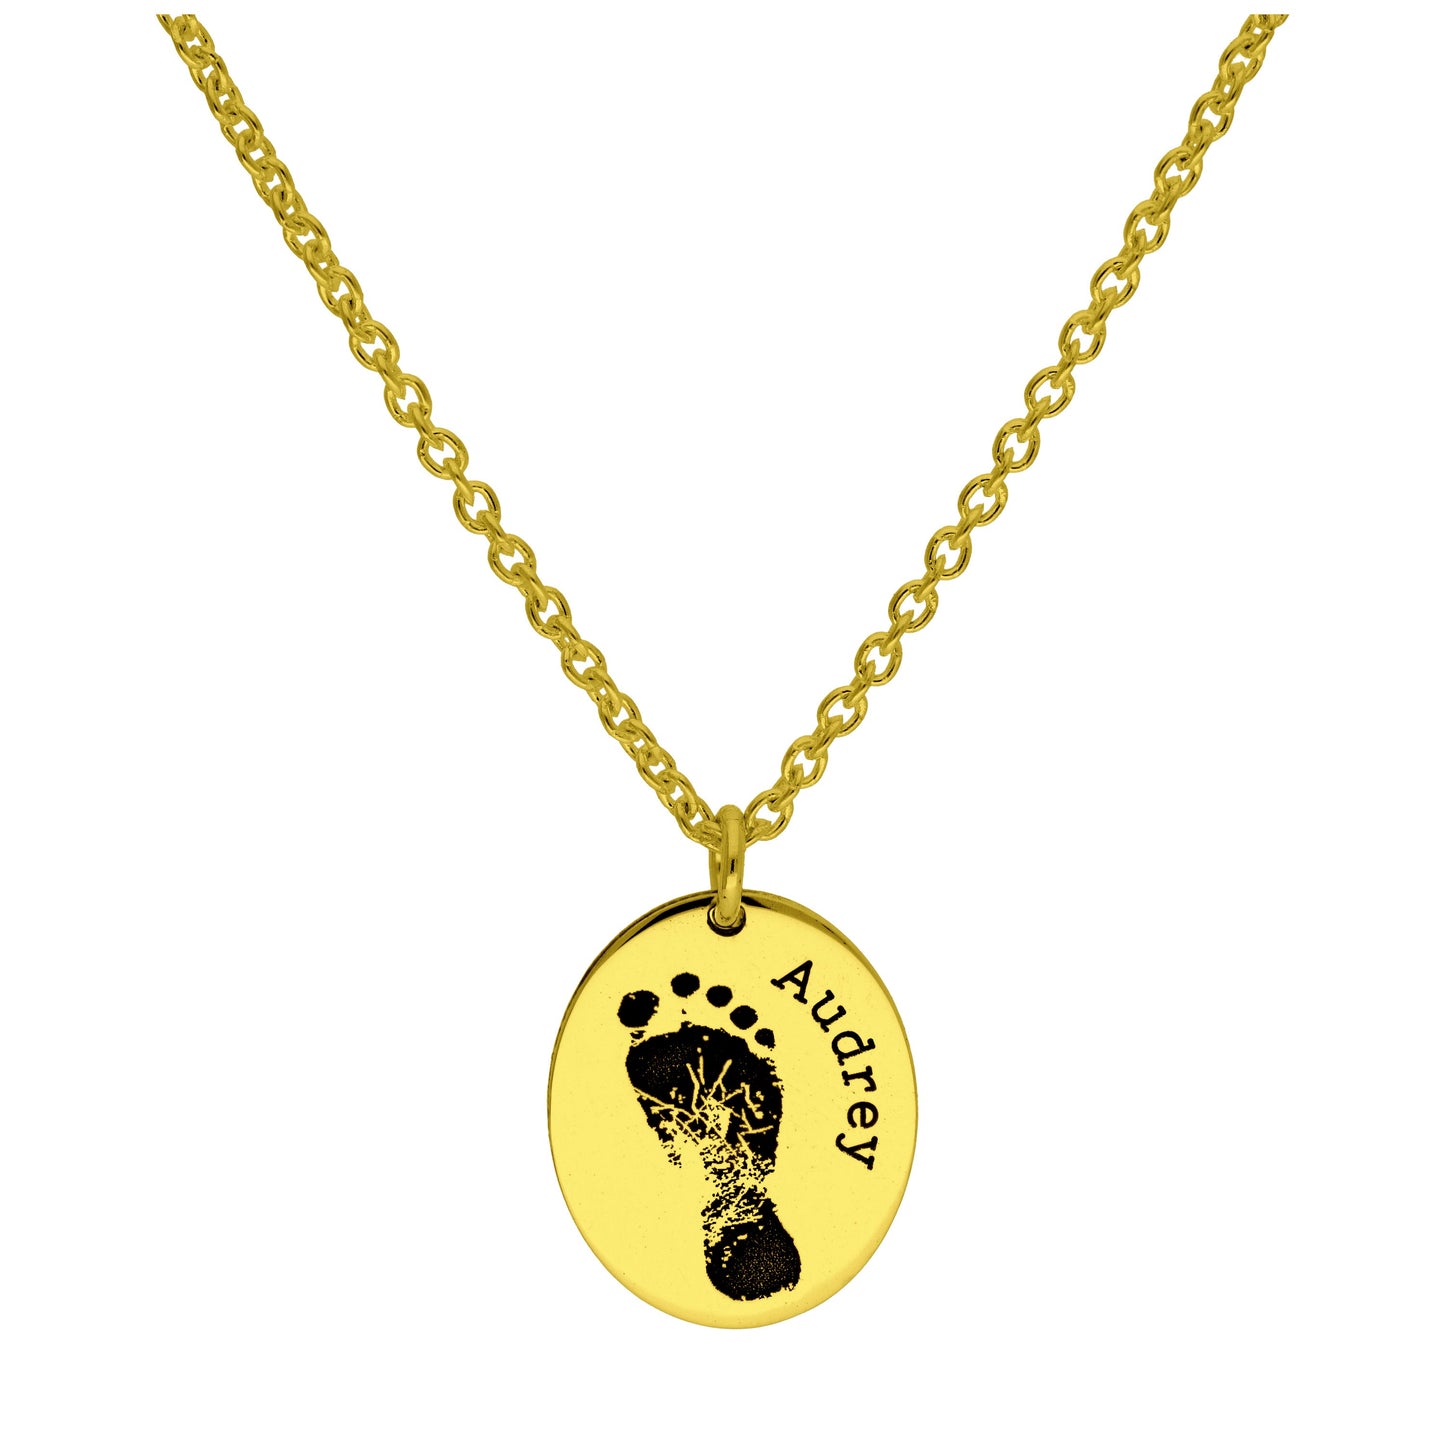 Bespoke Gold Plated Sterling Silver Footprint Oval Name Necklace 16 - 24 Inches